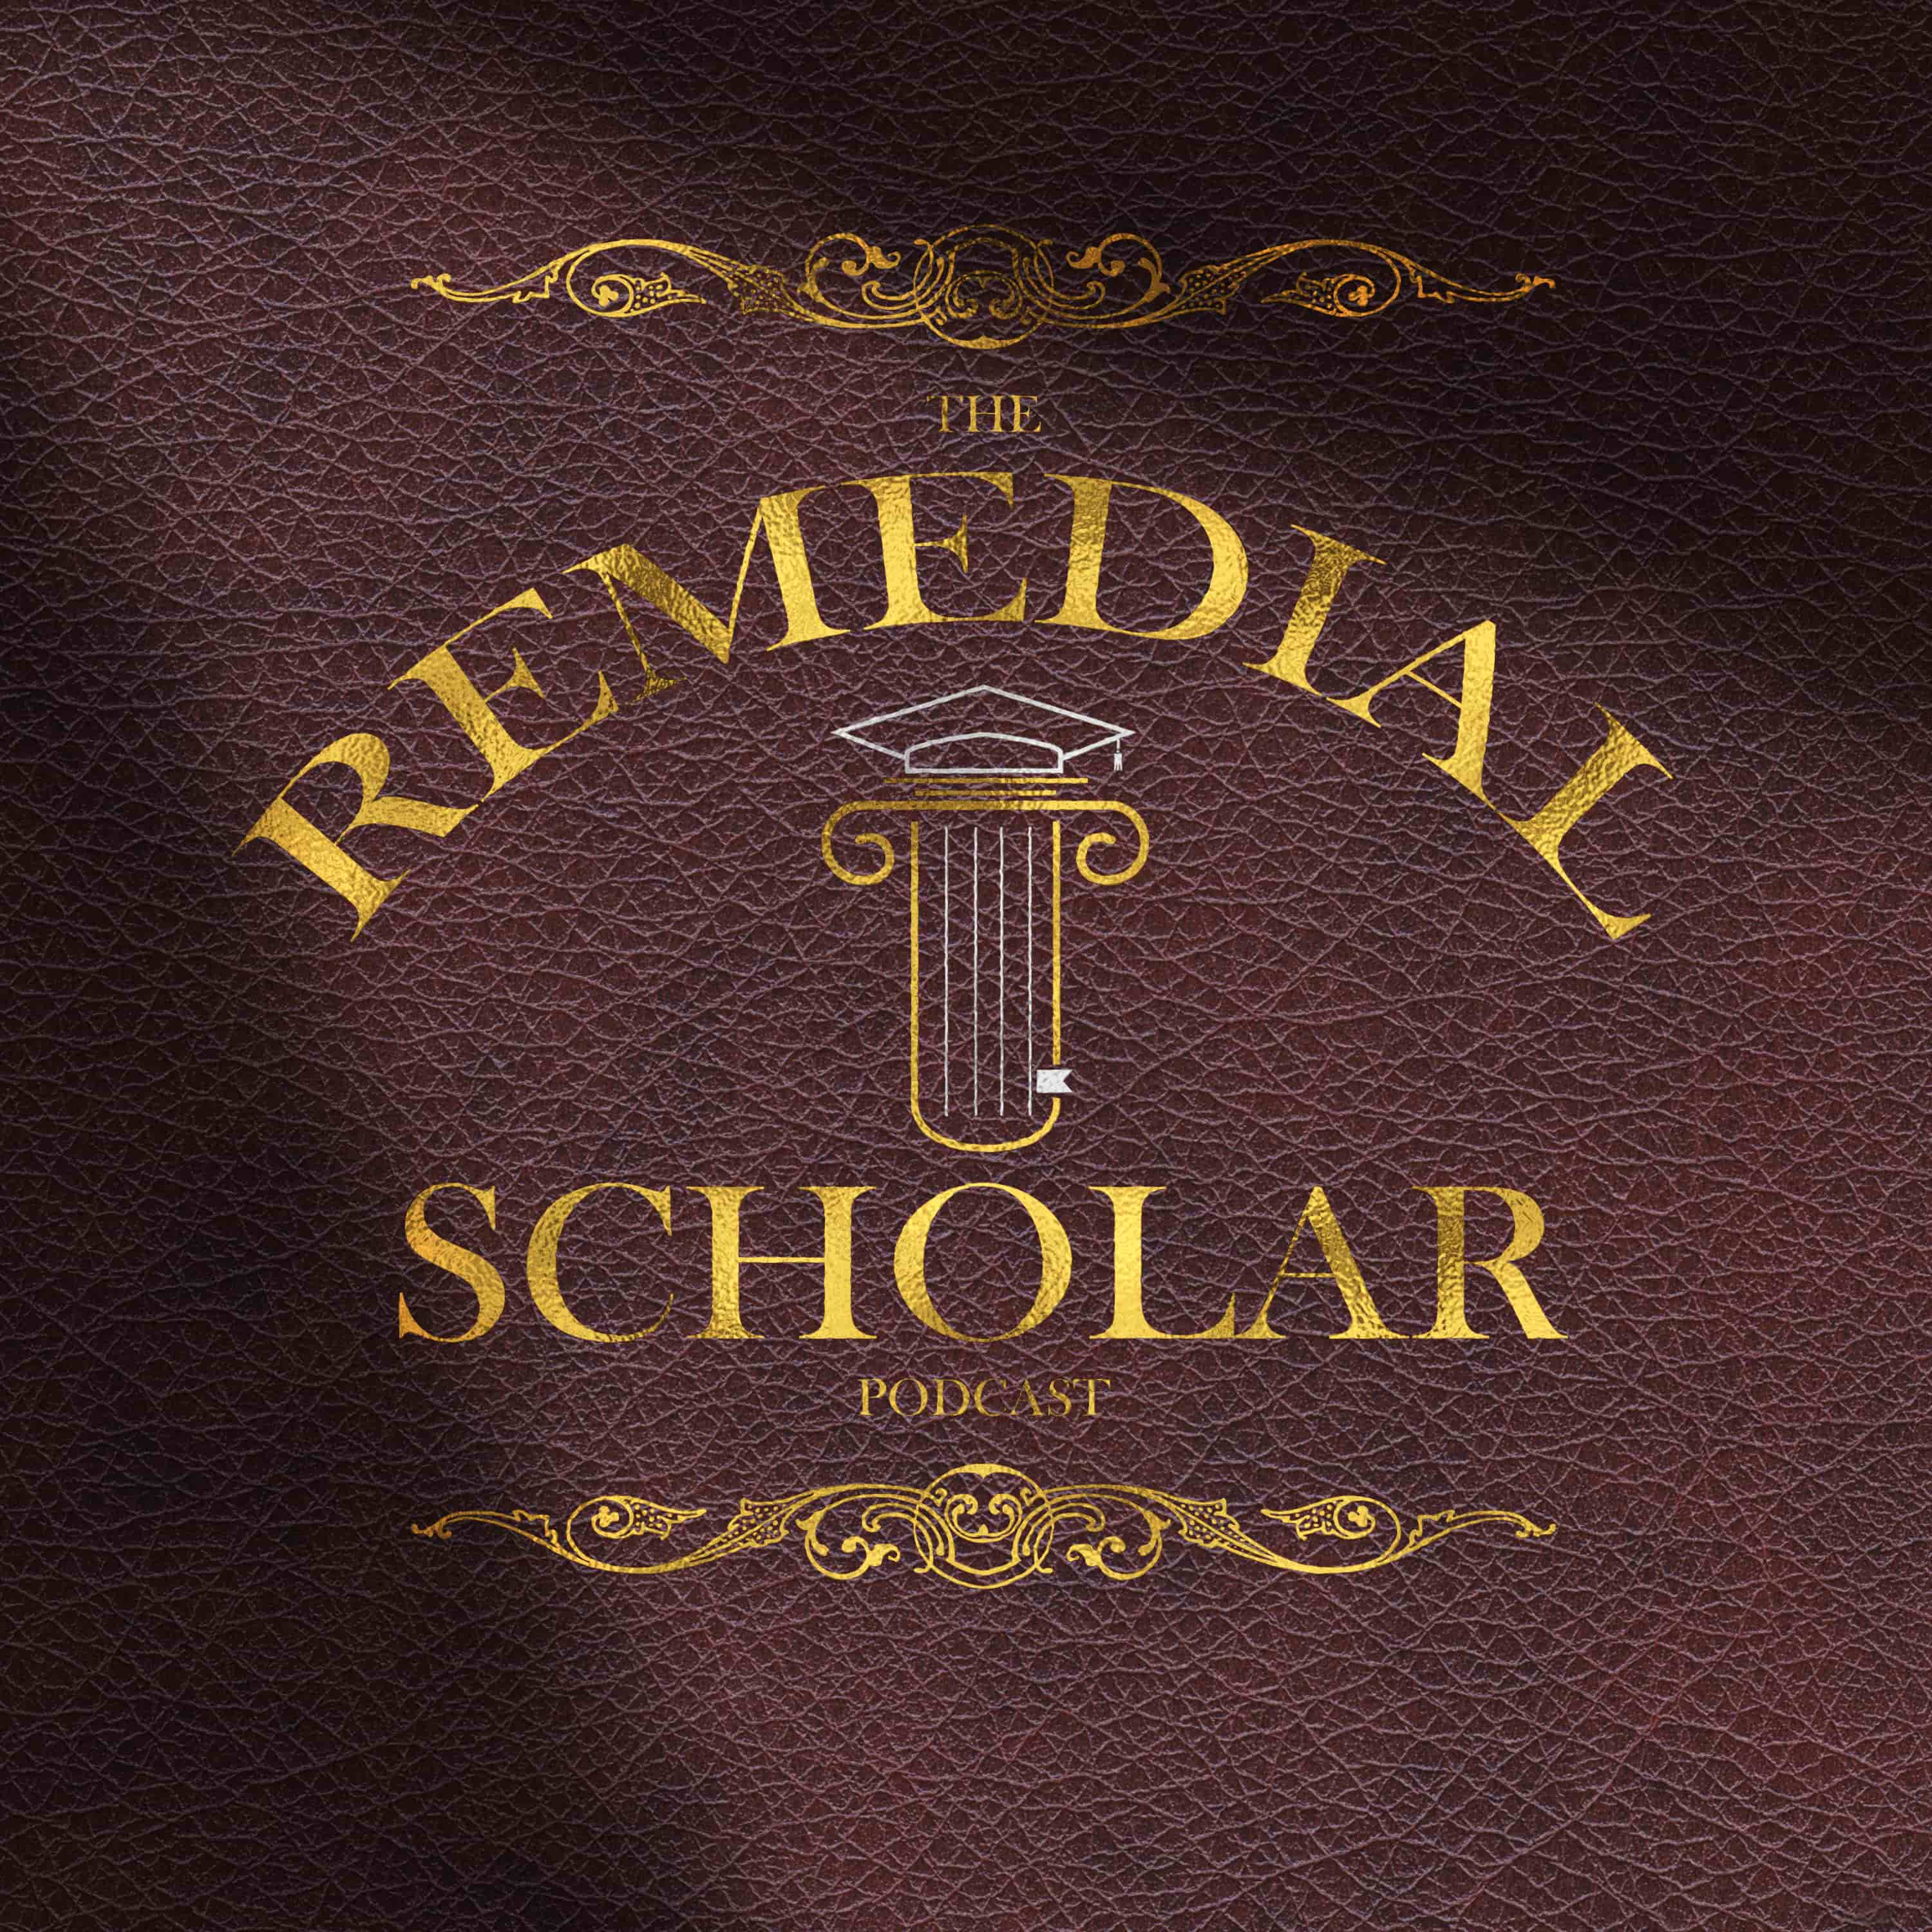 Show artwork for The Remedial Scholar